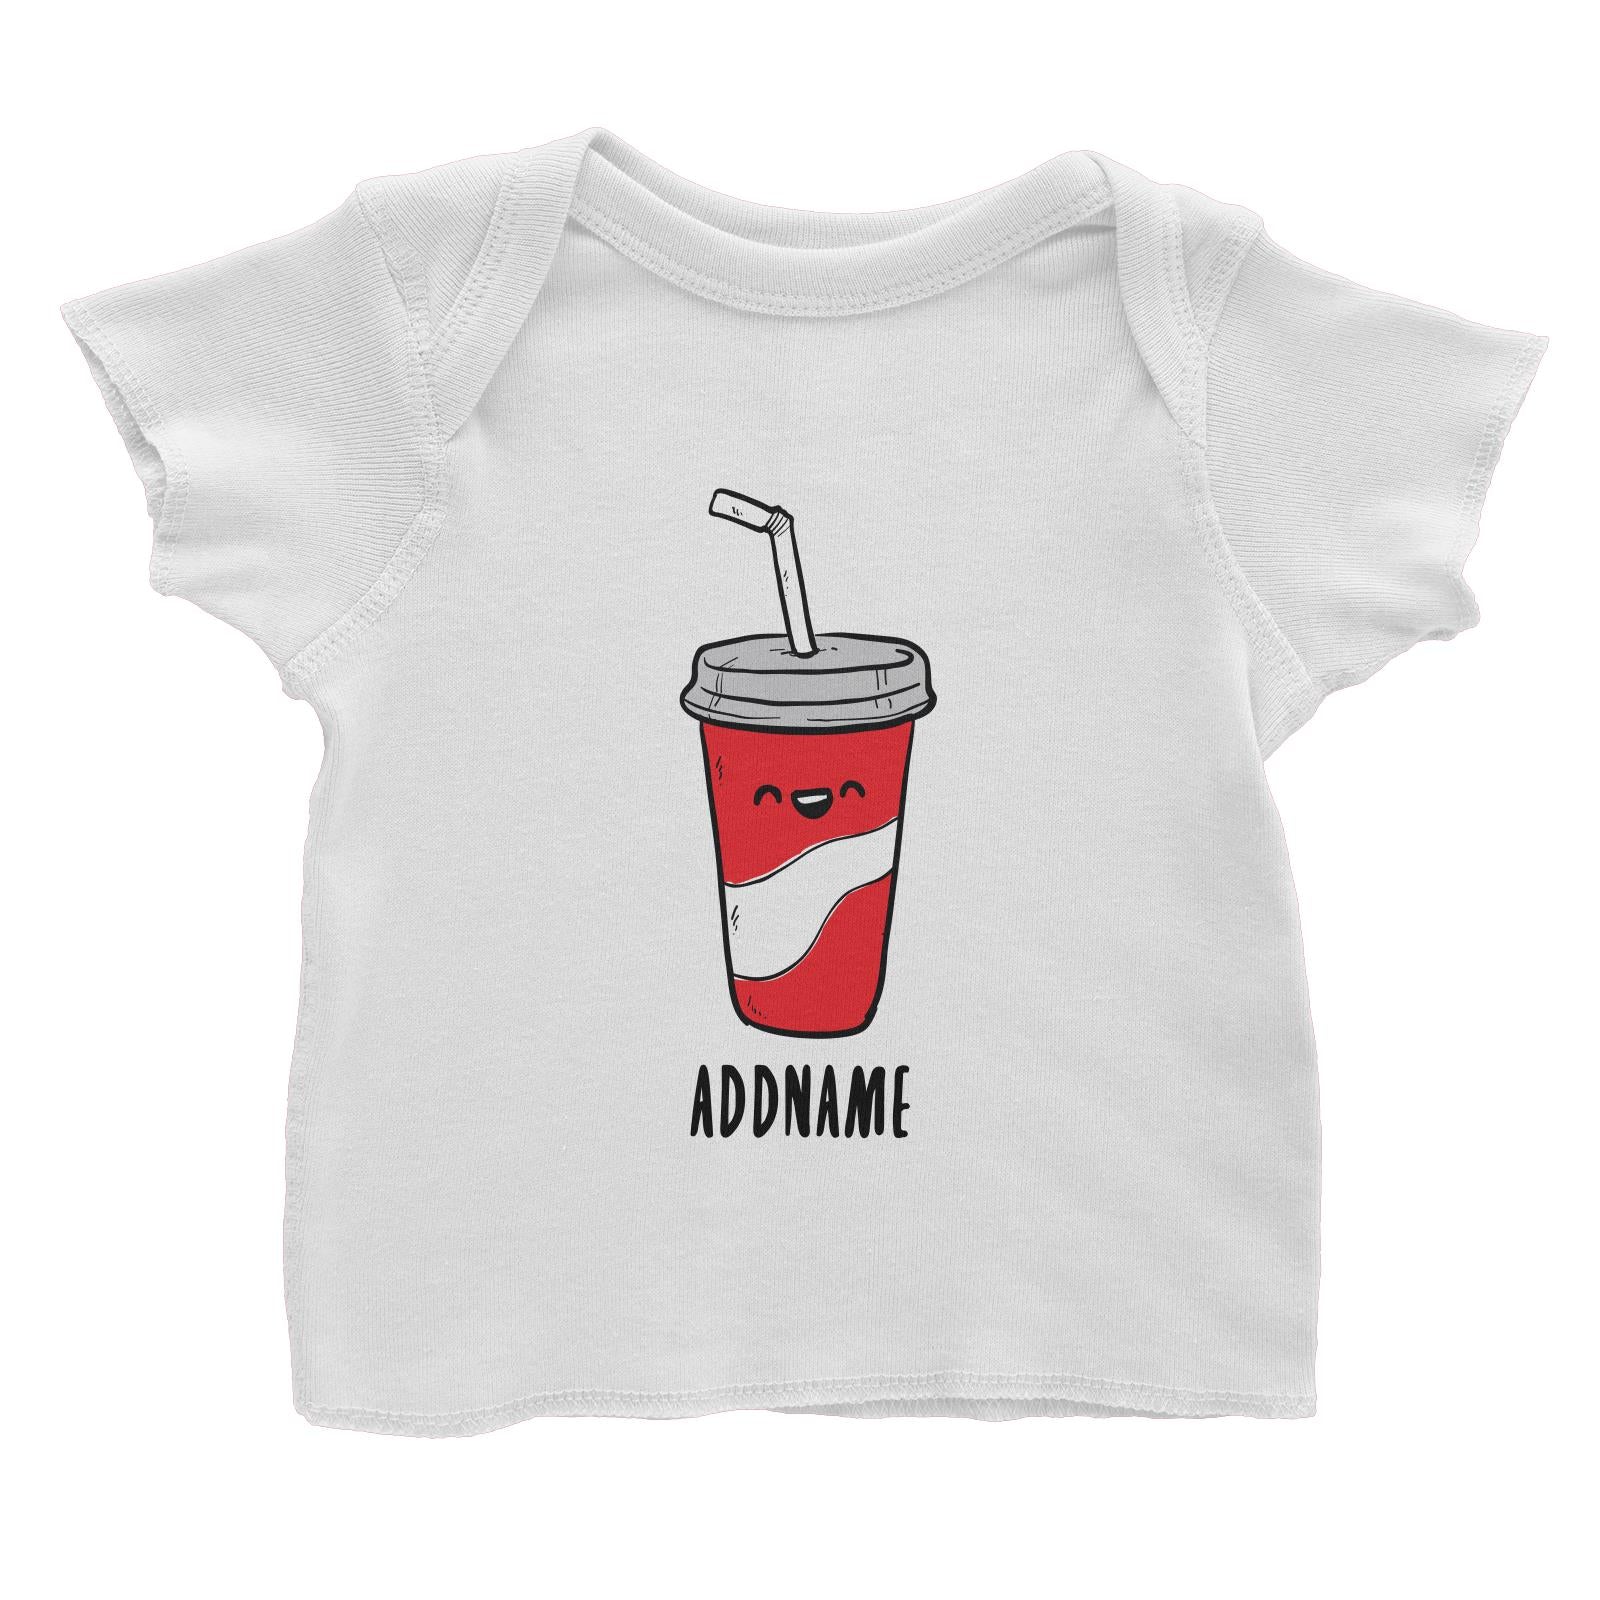 Fast Food Coke Addname Baby T-Shirt  Comic Cartoon Matching Family Personalizable Designs